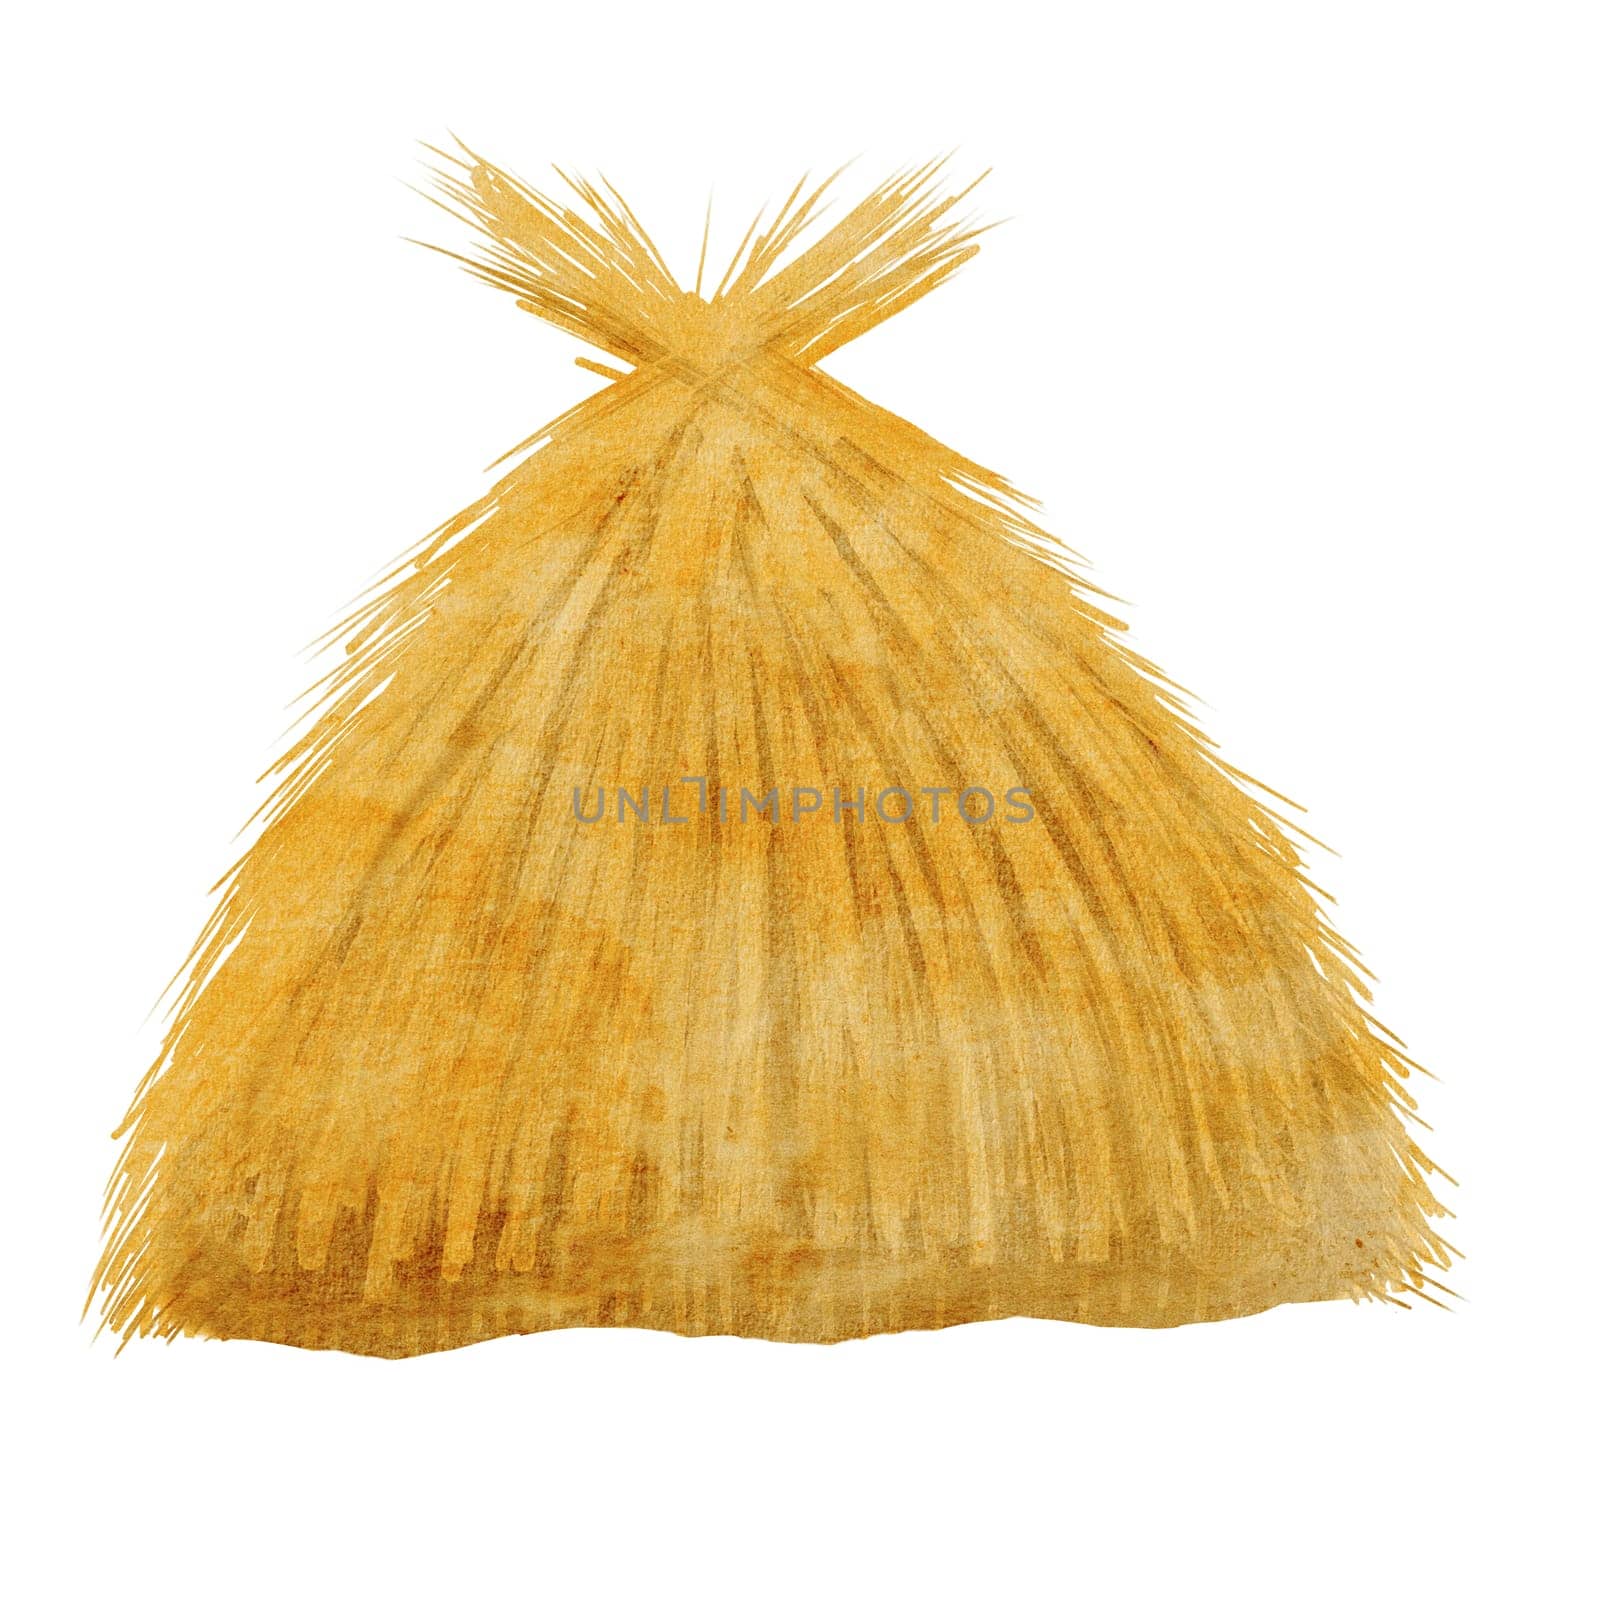 Haystack or straw illustration watercolor. Clip art hand drawing isolated on white background of dry ears. Country style. For design cards, booklets, tags for agriculture and boho home design. High quality photo